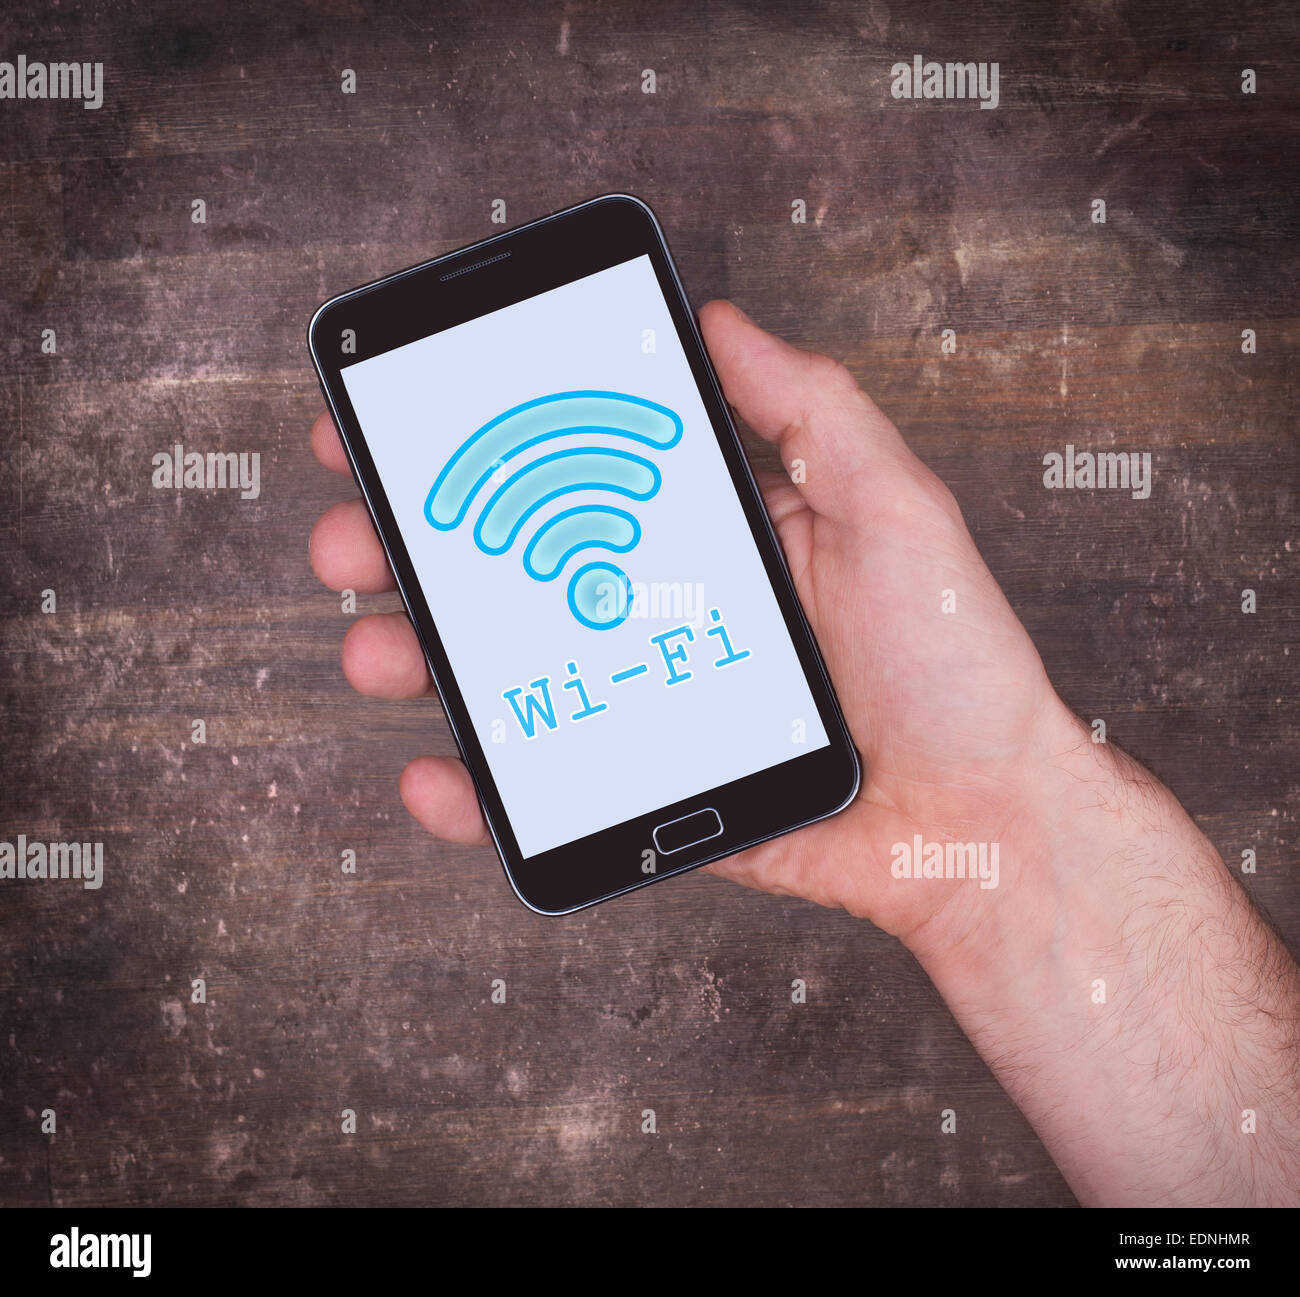 Wi-Fi on a mobile phone, vintage setting Stock Photo